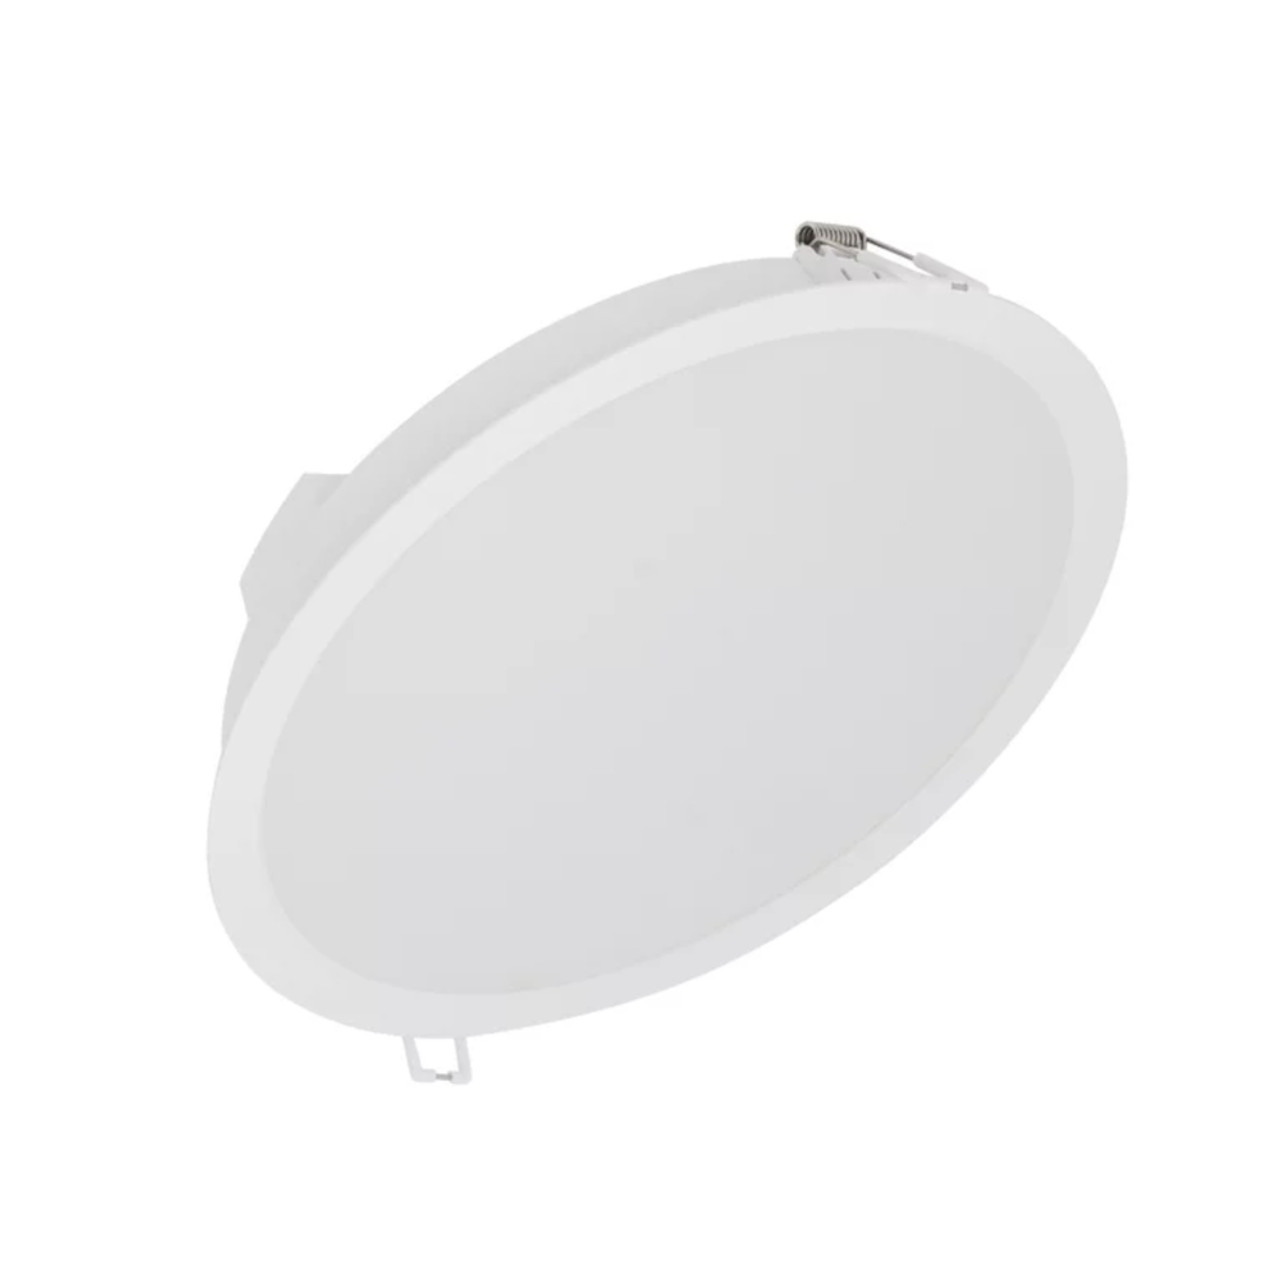 LED Downlight 24W 2400lm 4000K IP44 100 Degrees 200mm Cut Out Ledvance